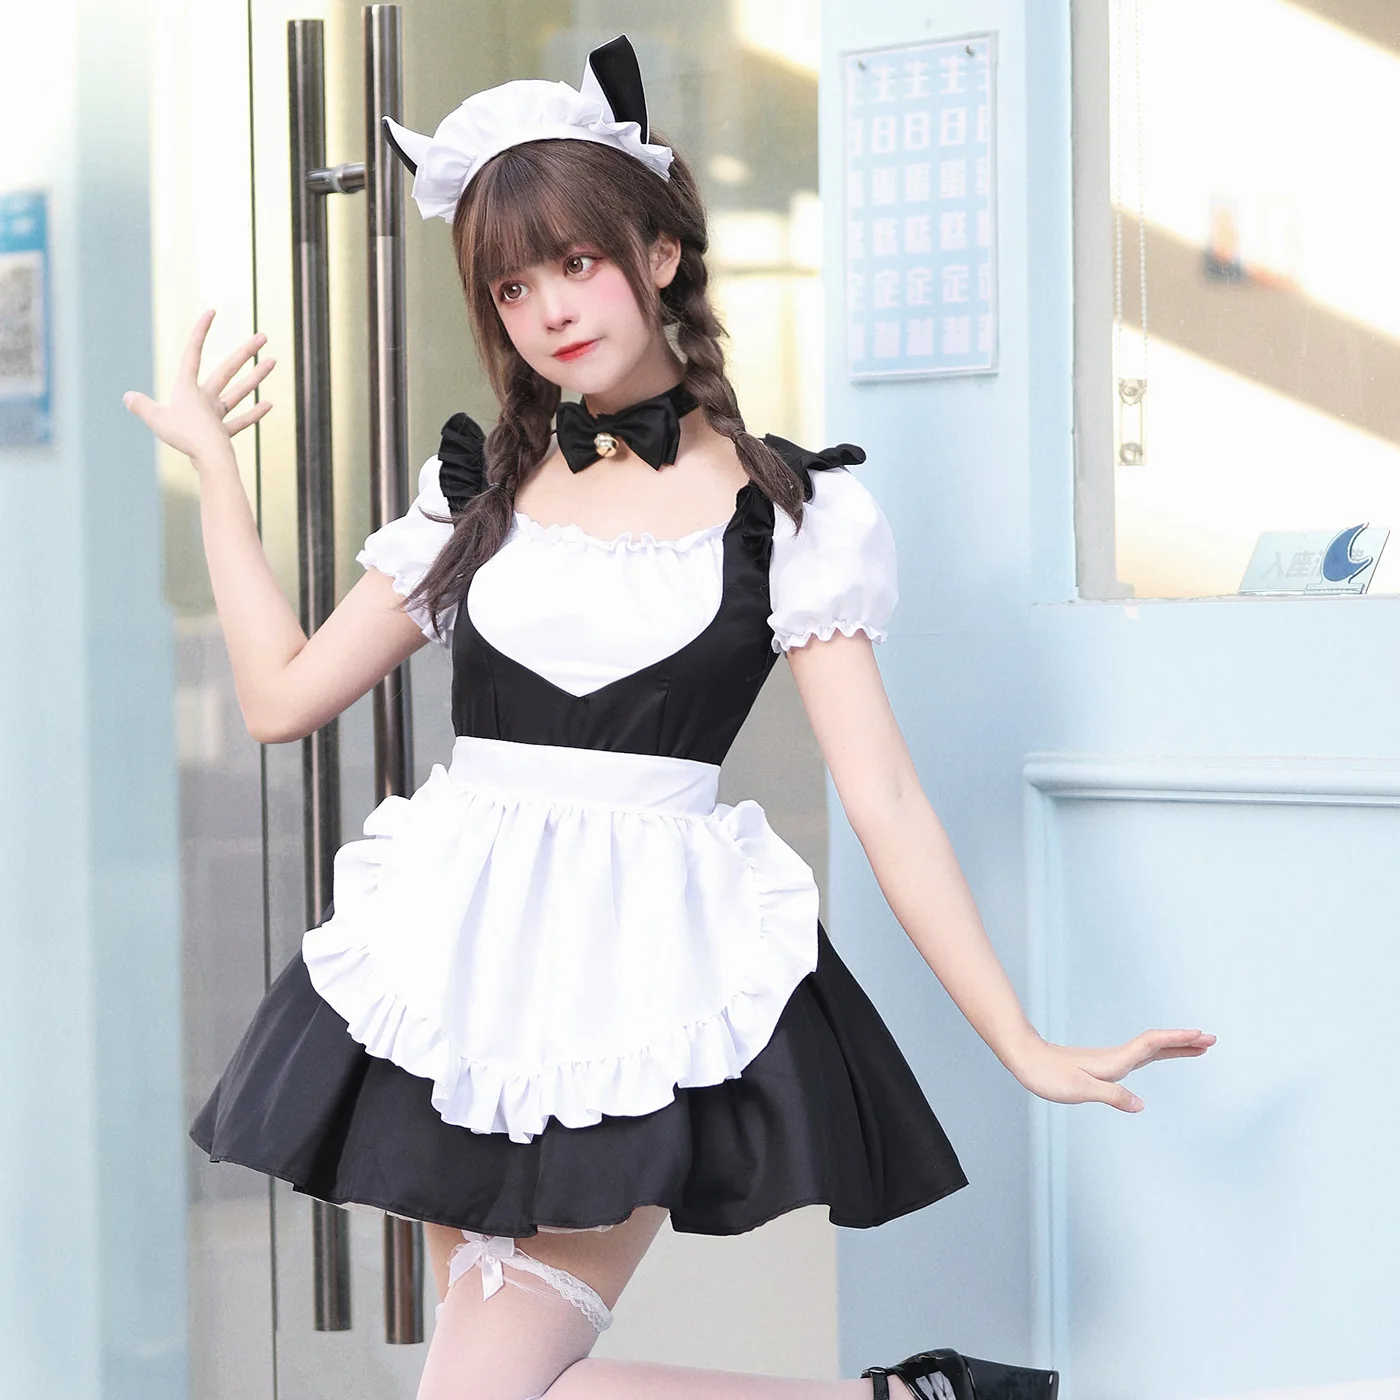 

Cat Maid Suit Lolita Dress Kawaii Role Play Costumes Aesthetic Uniforms Woman Classical Style Anime Cosplay Waiter Uniforms